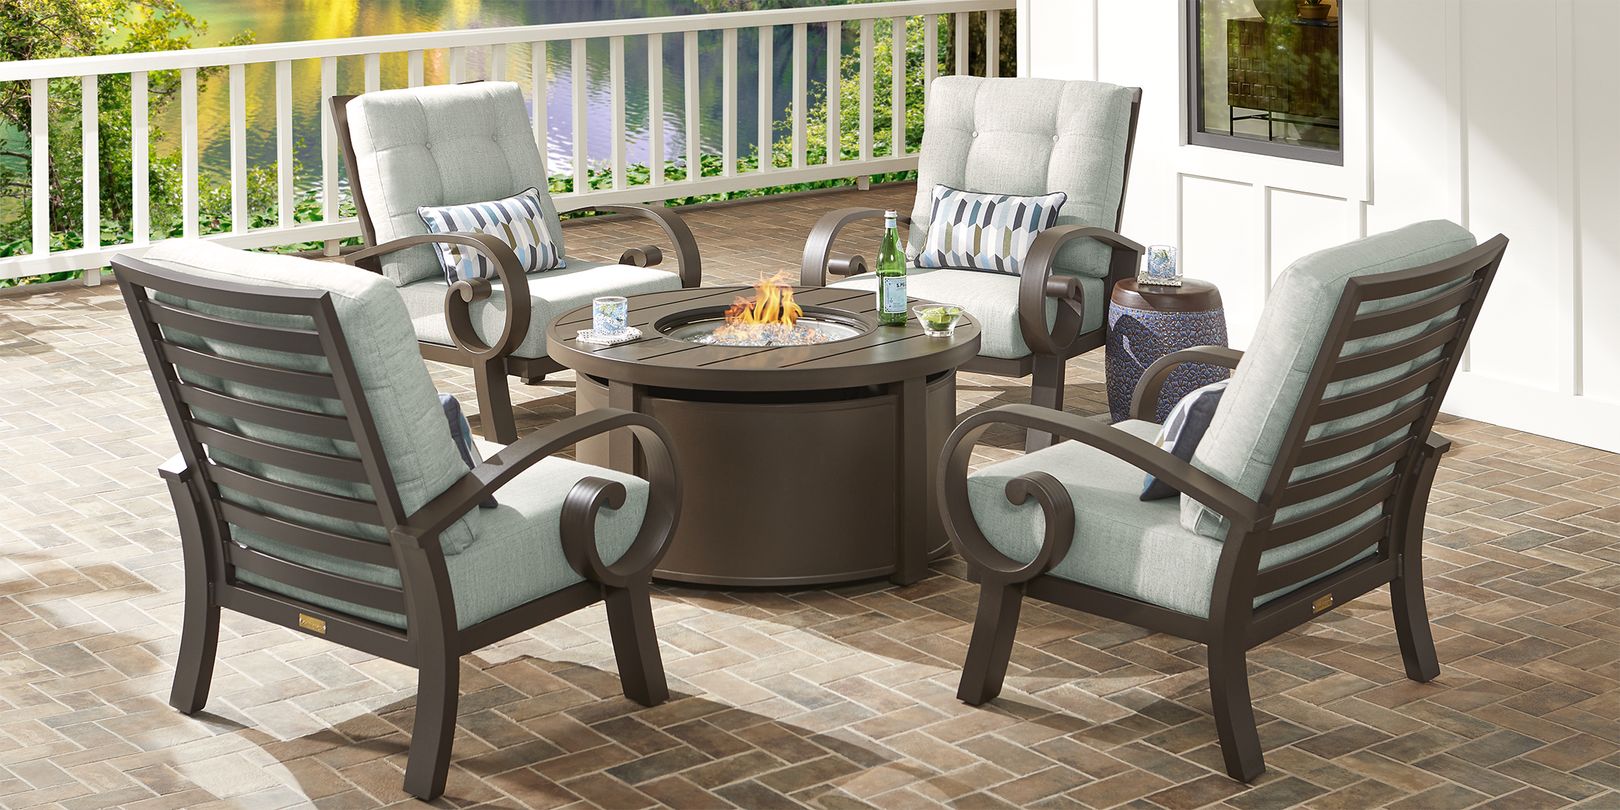 Photo of four metal chairs around a metal fire pit